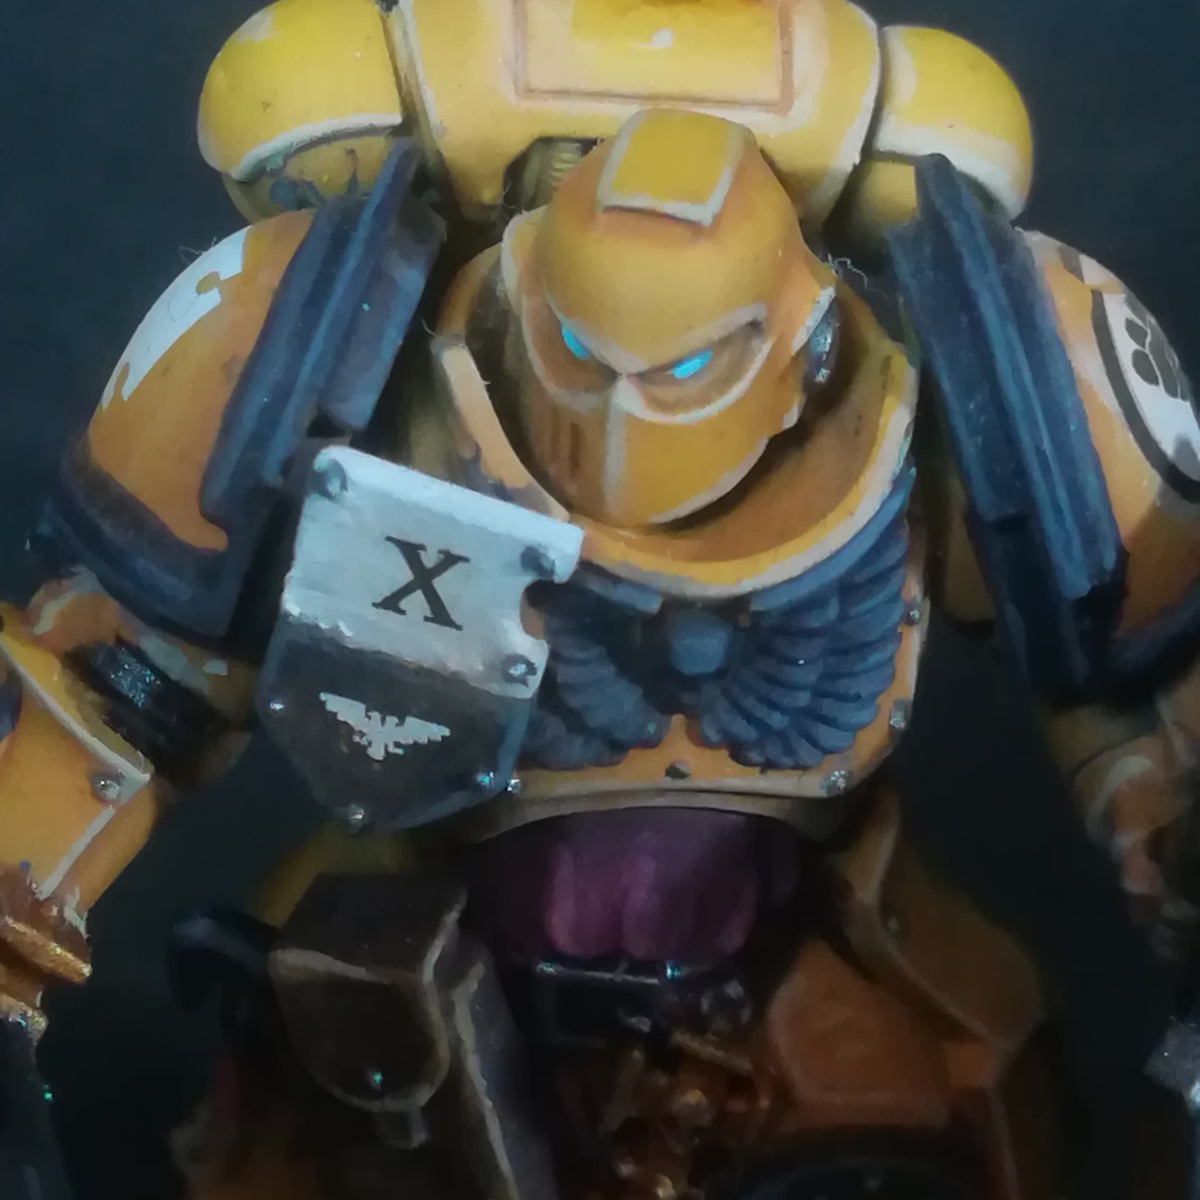 Imperial Fists Yelllow